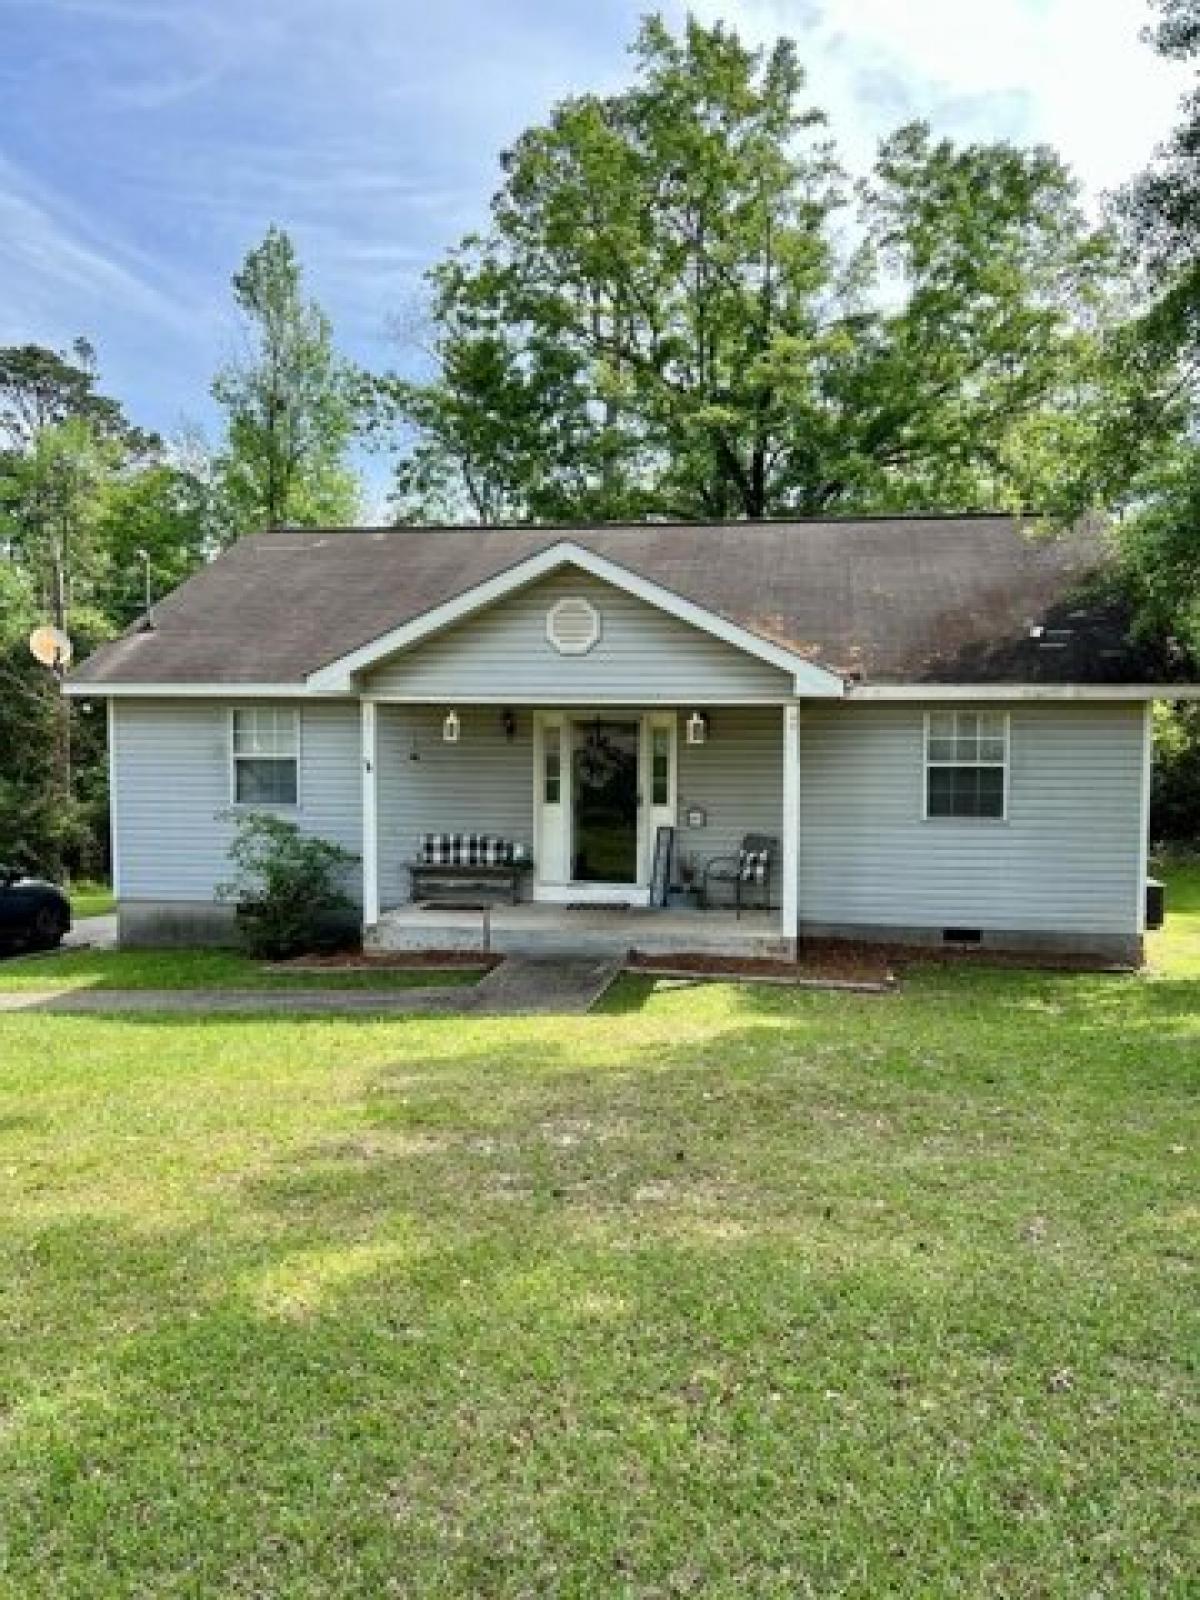 Picture of Home For Sale in Eufaula, Alabama, United States